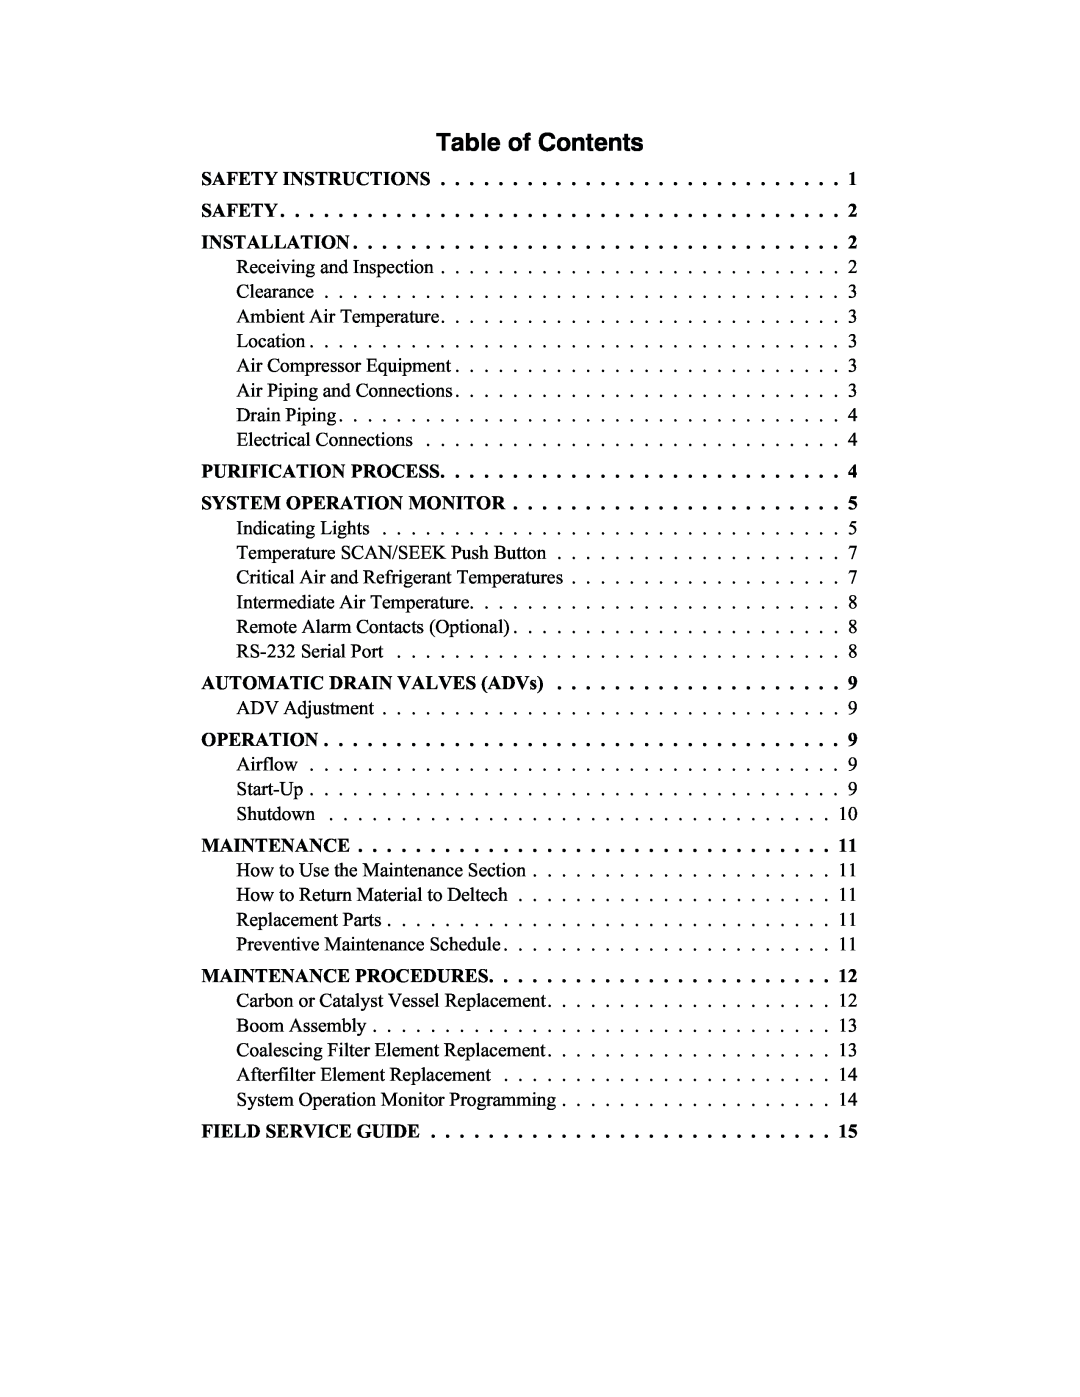 Deltech Fitness 8000 instruction manual Table of Contents 